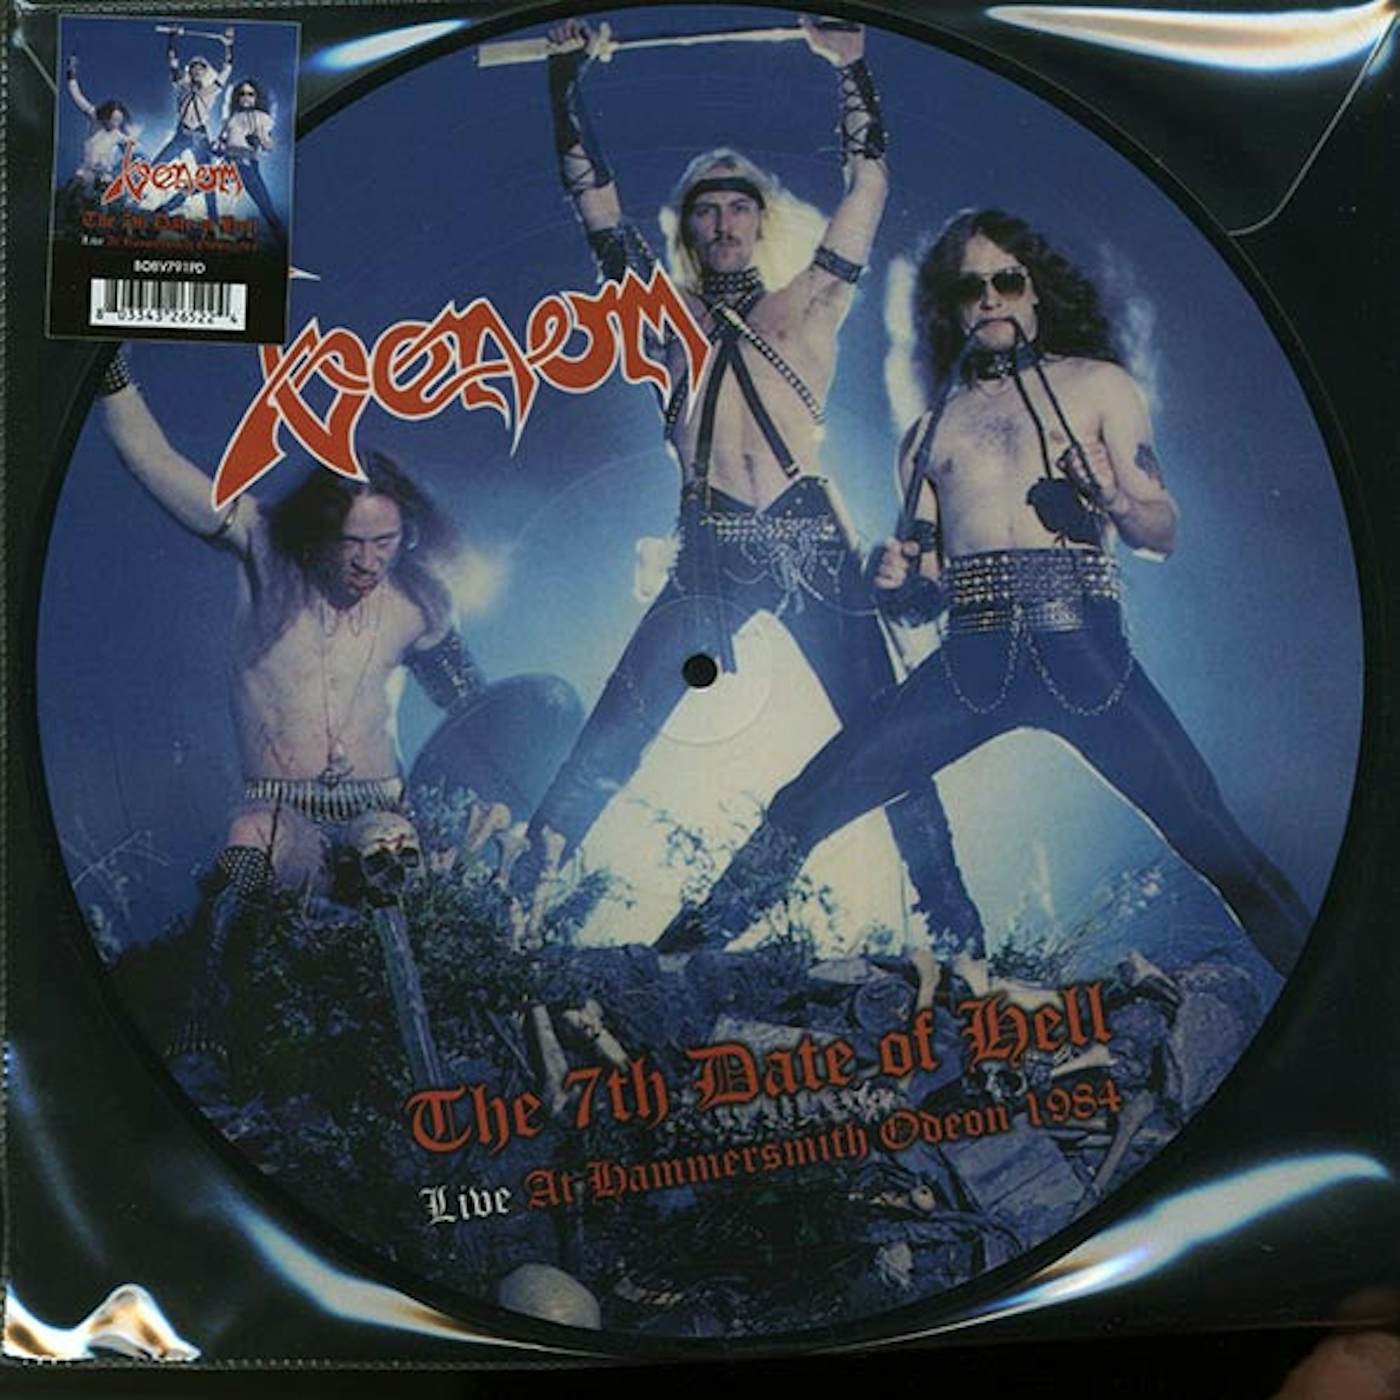 Venom  LP -  The 7th Date Of Hell: Live At Hammersmith Odeon 1984 (ltd. ed.) (picture disc) (Vinyl)